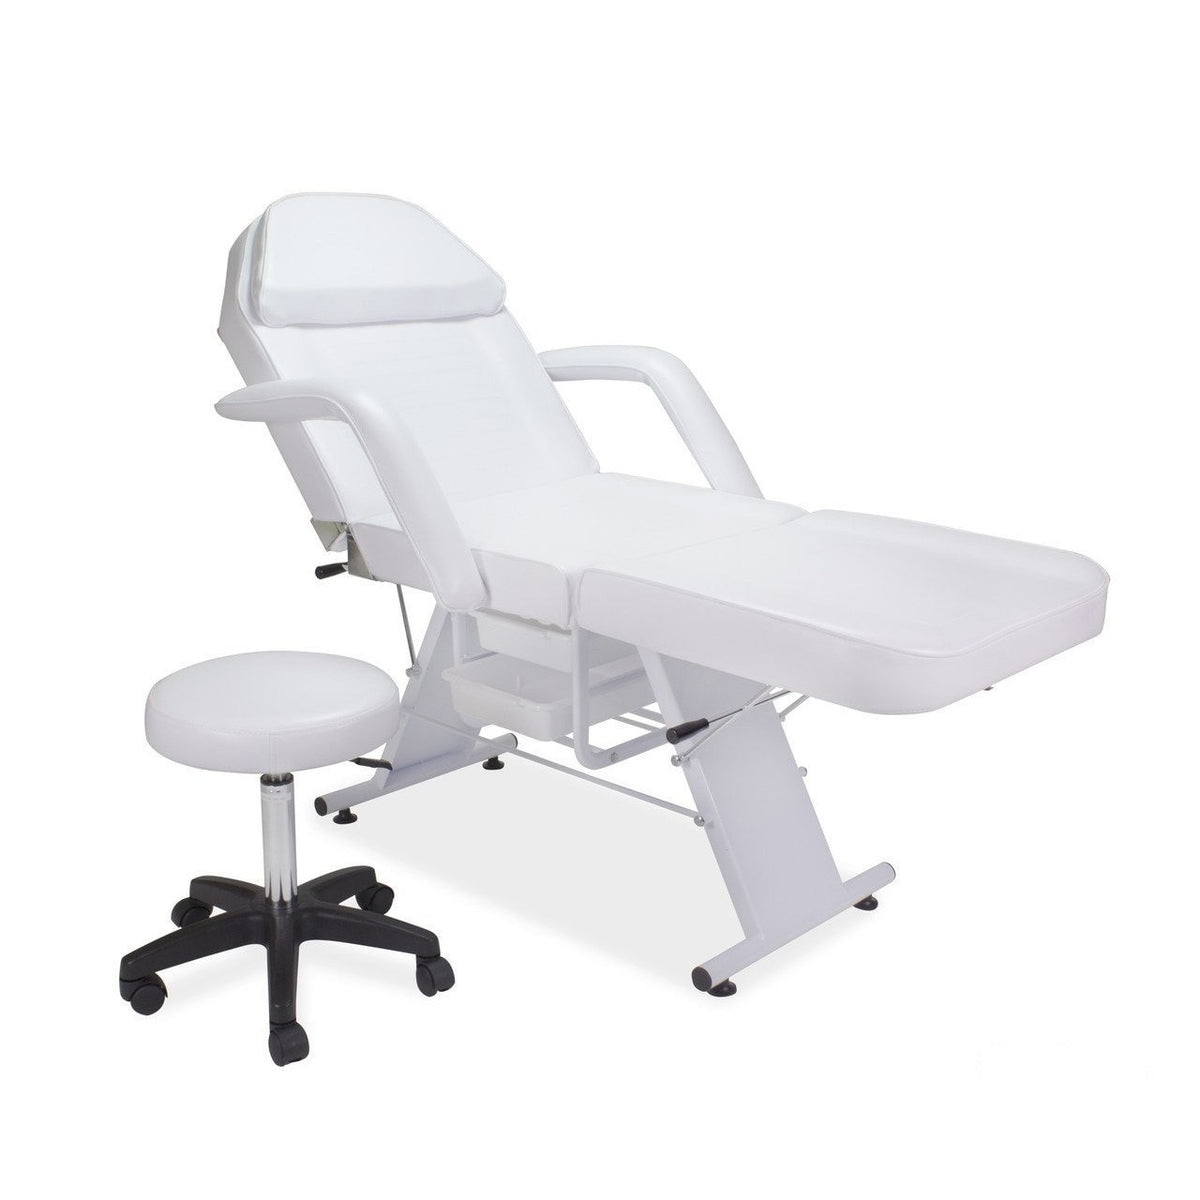 Dermalogic Dermalogic Parker Facial Bed &amp; Stool Facial Chairs - ChairsThatGive